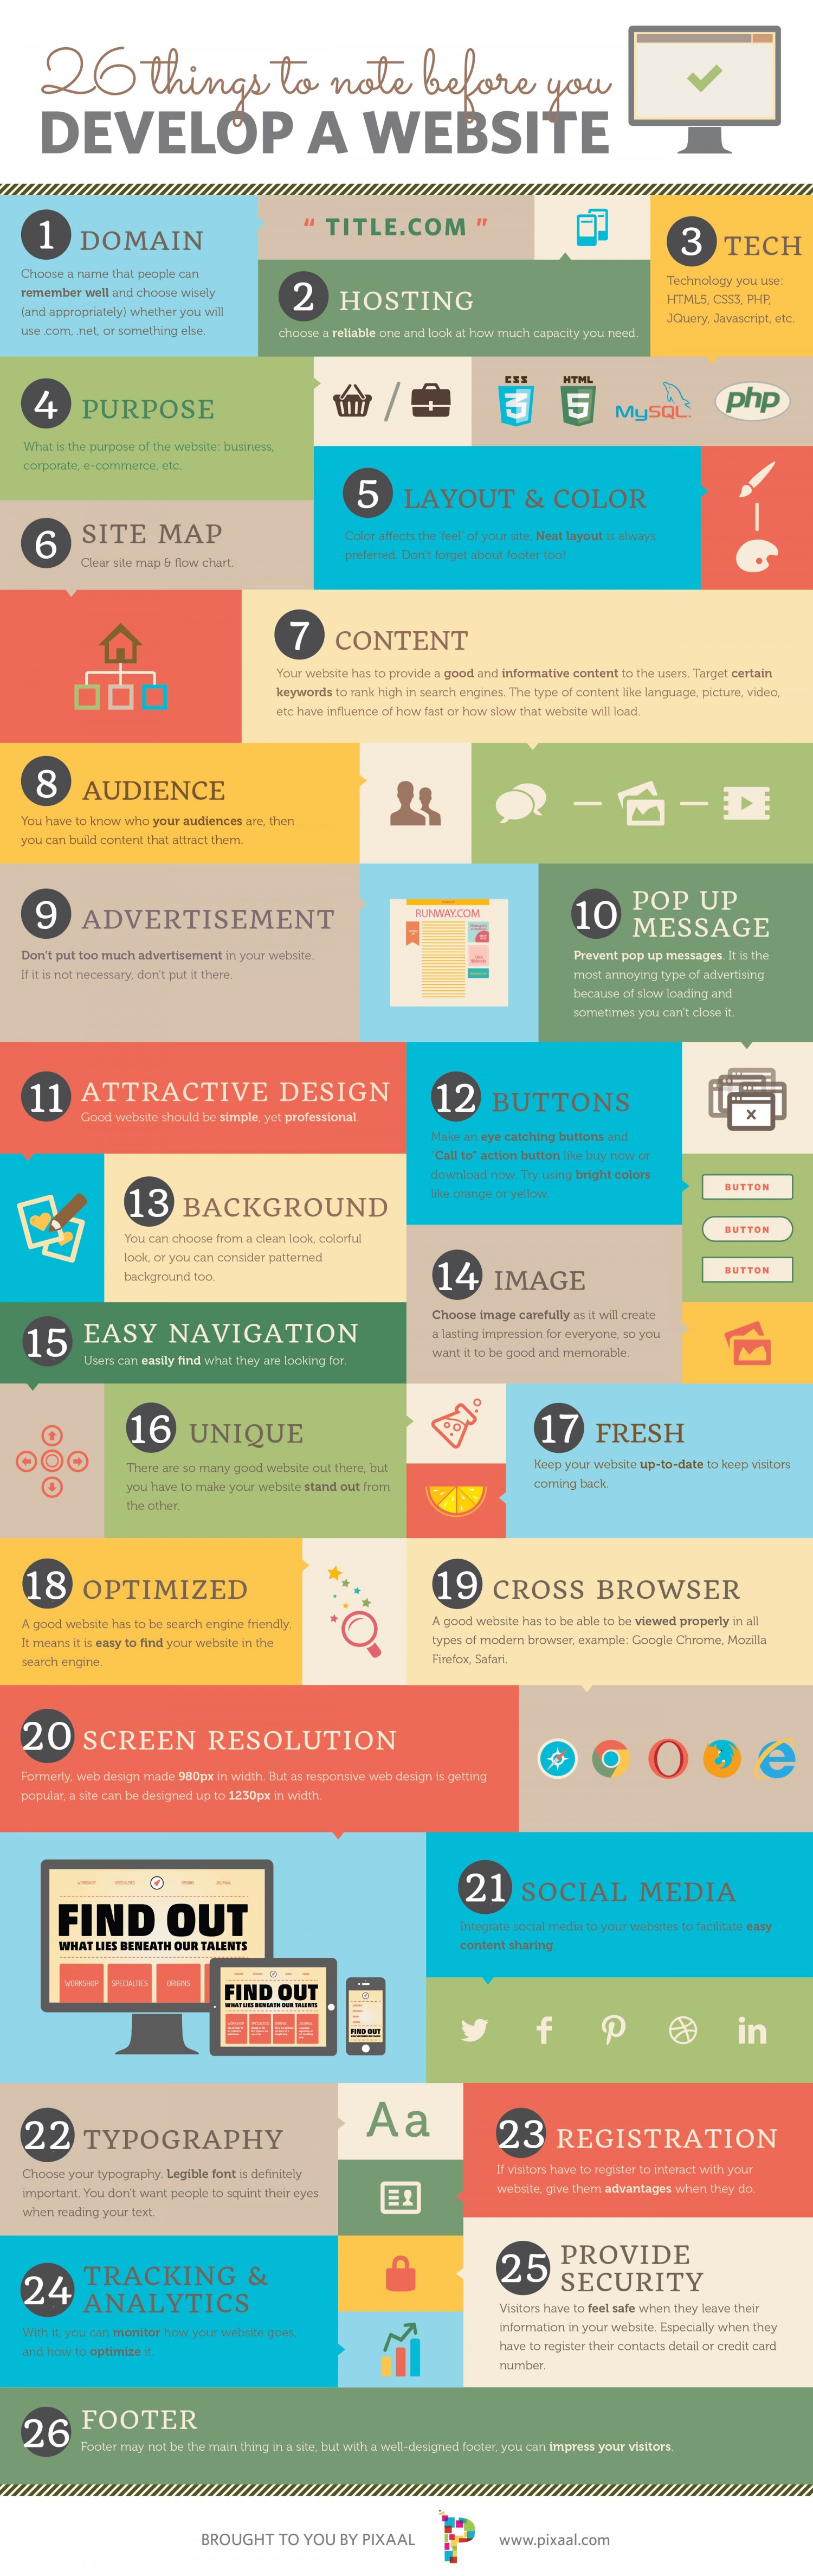  26 Things to note before you develop a website